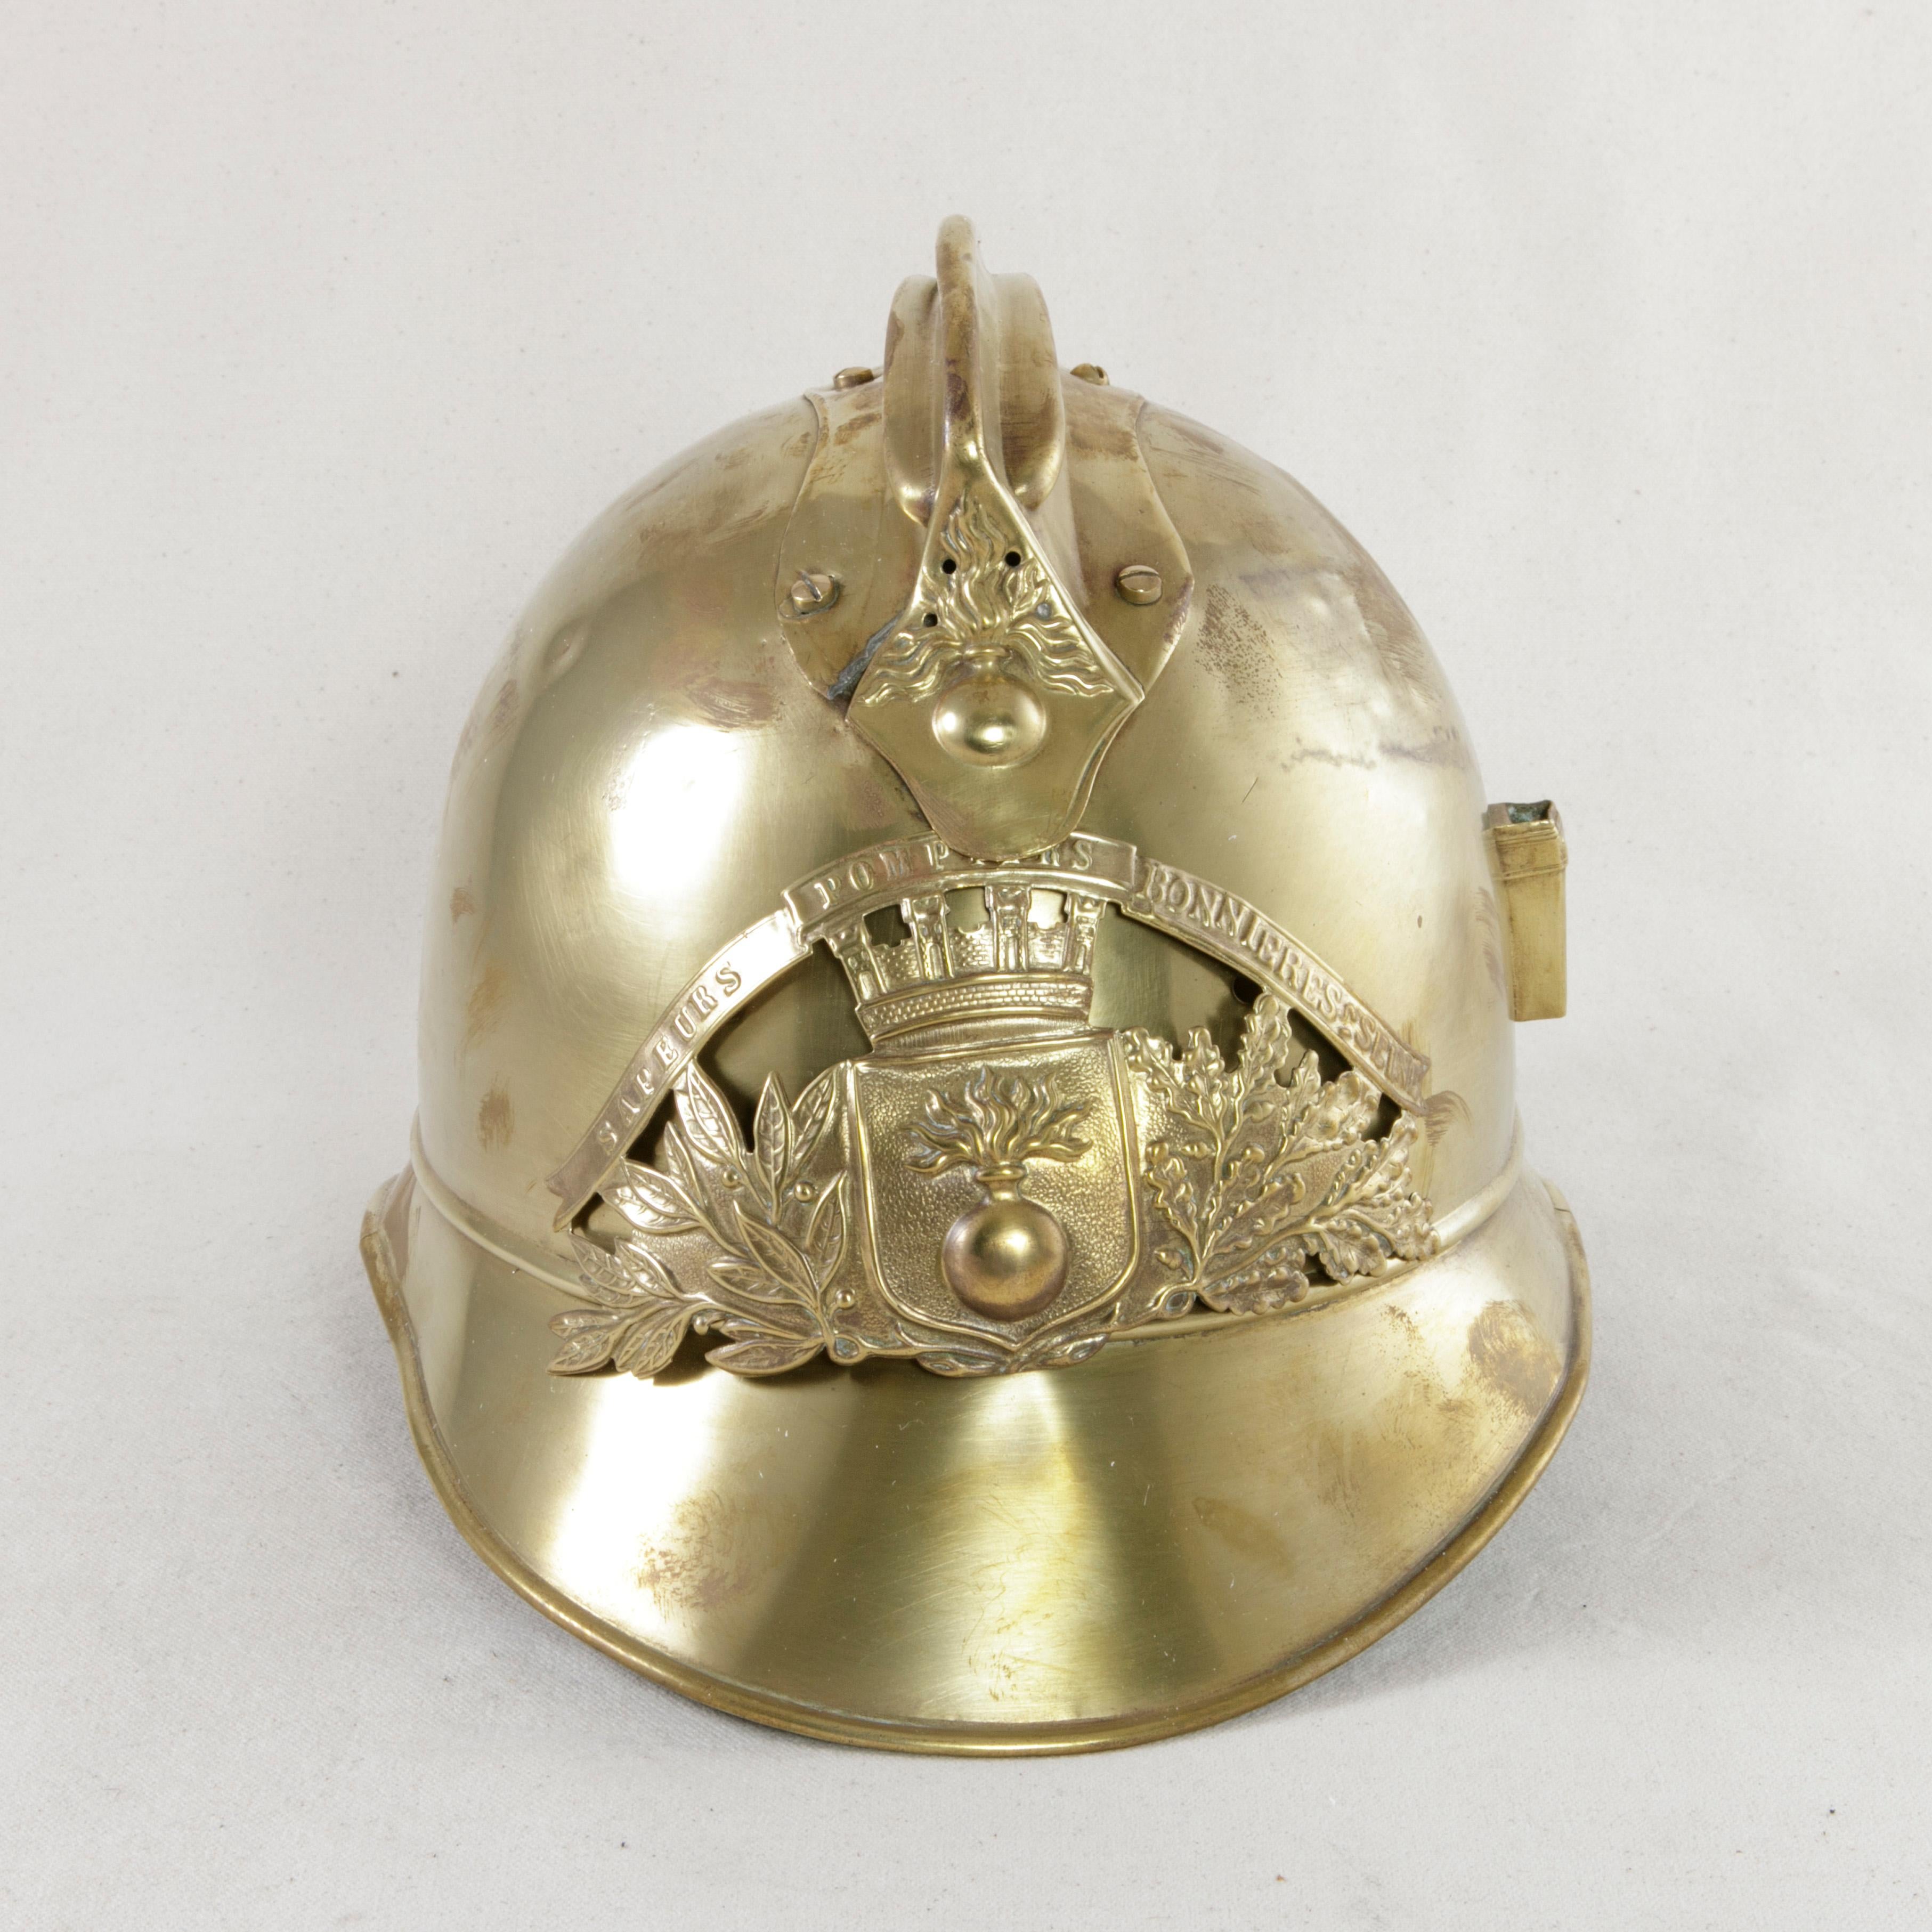 This French brass fireman's helmet from the turn of the 20th century takes the form of a French military helmet, a style frequently seen during the First World War. The front plate of the helmet bears the classic French fireman symbol of a flaming